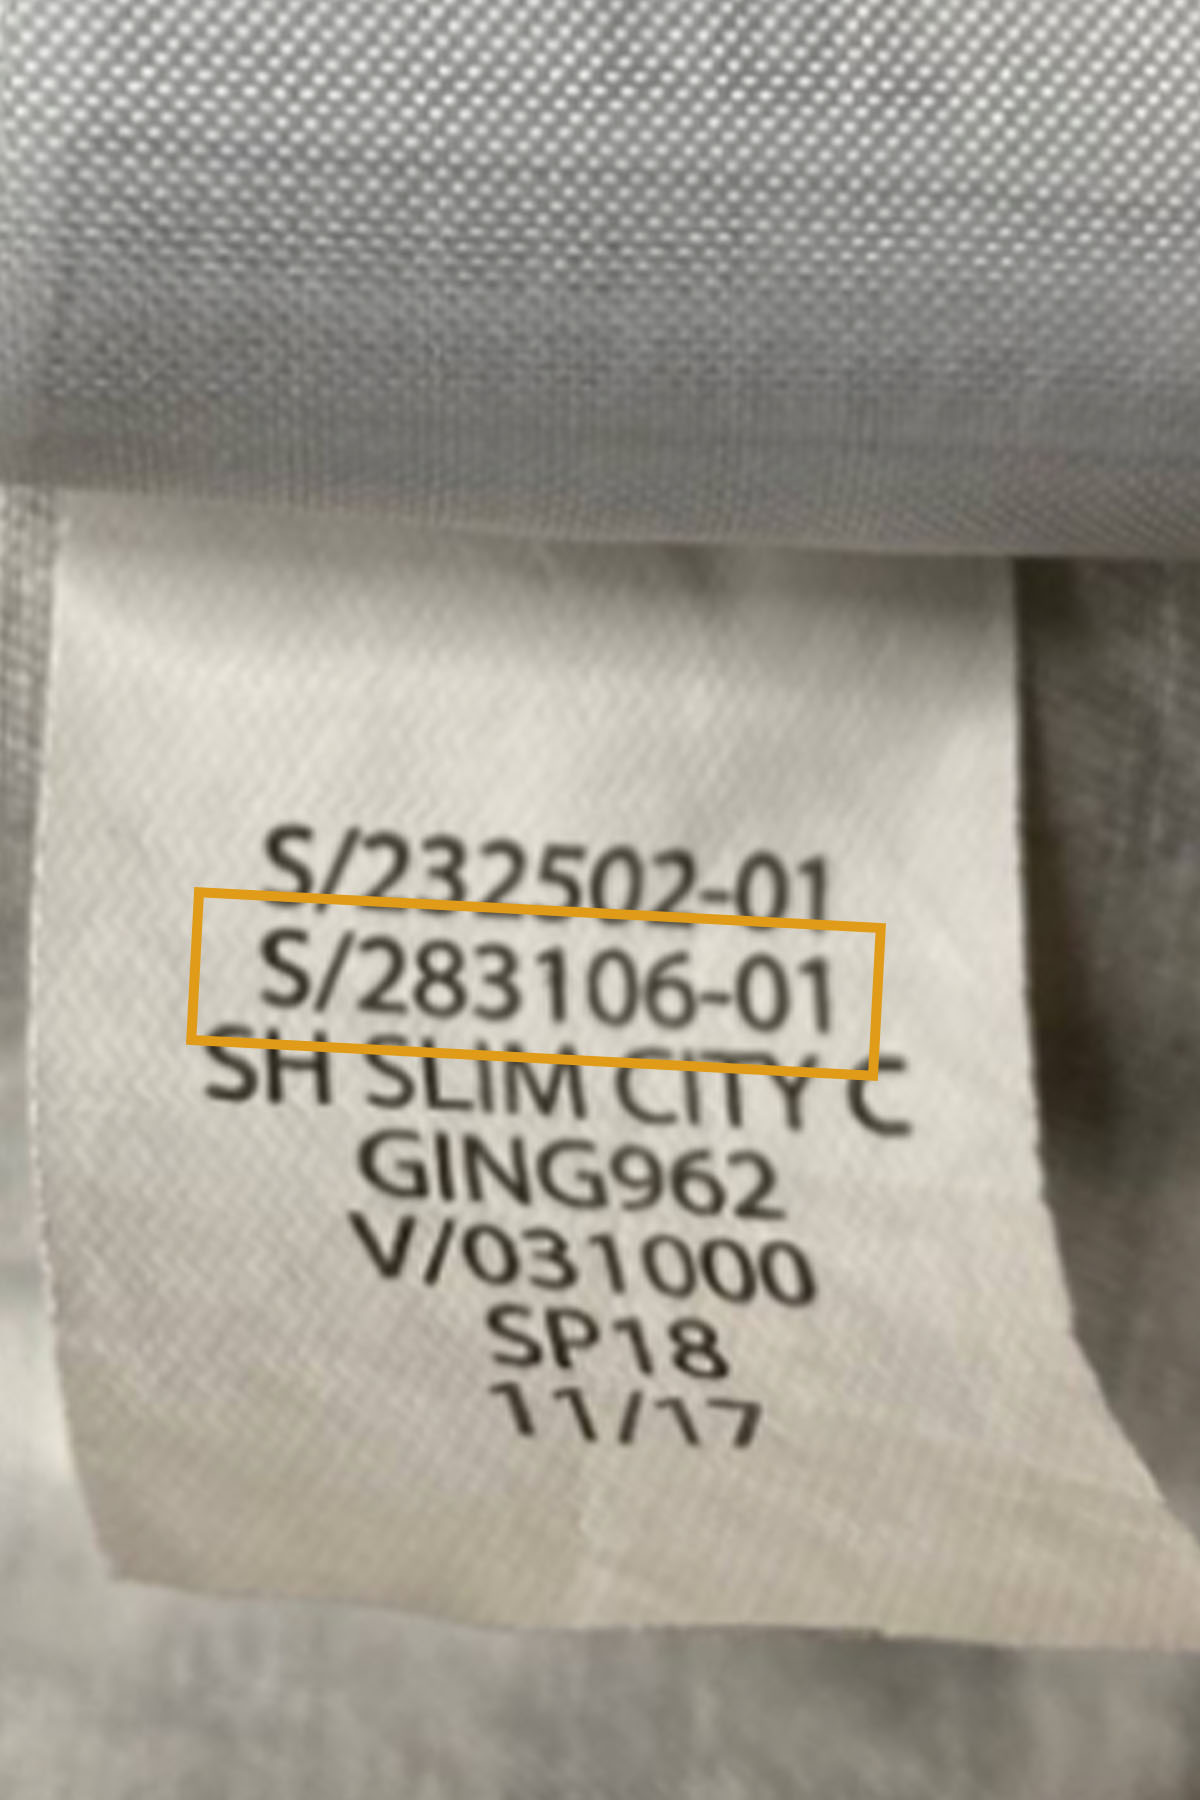 a gap inside tag showing the style number.